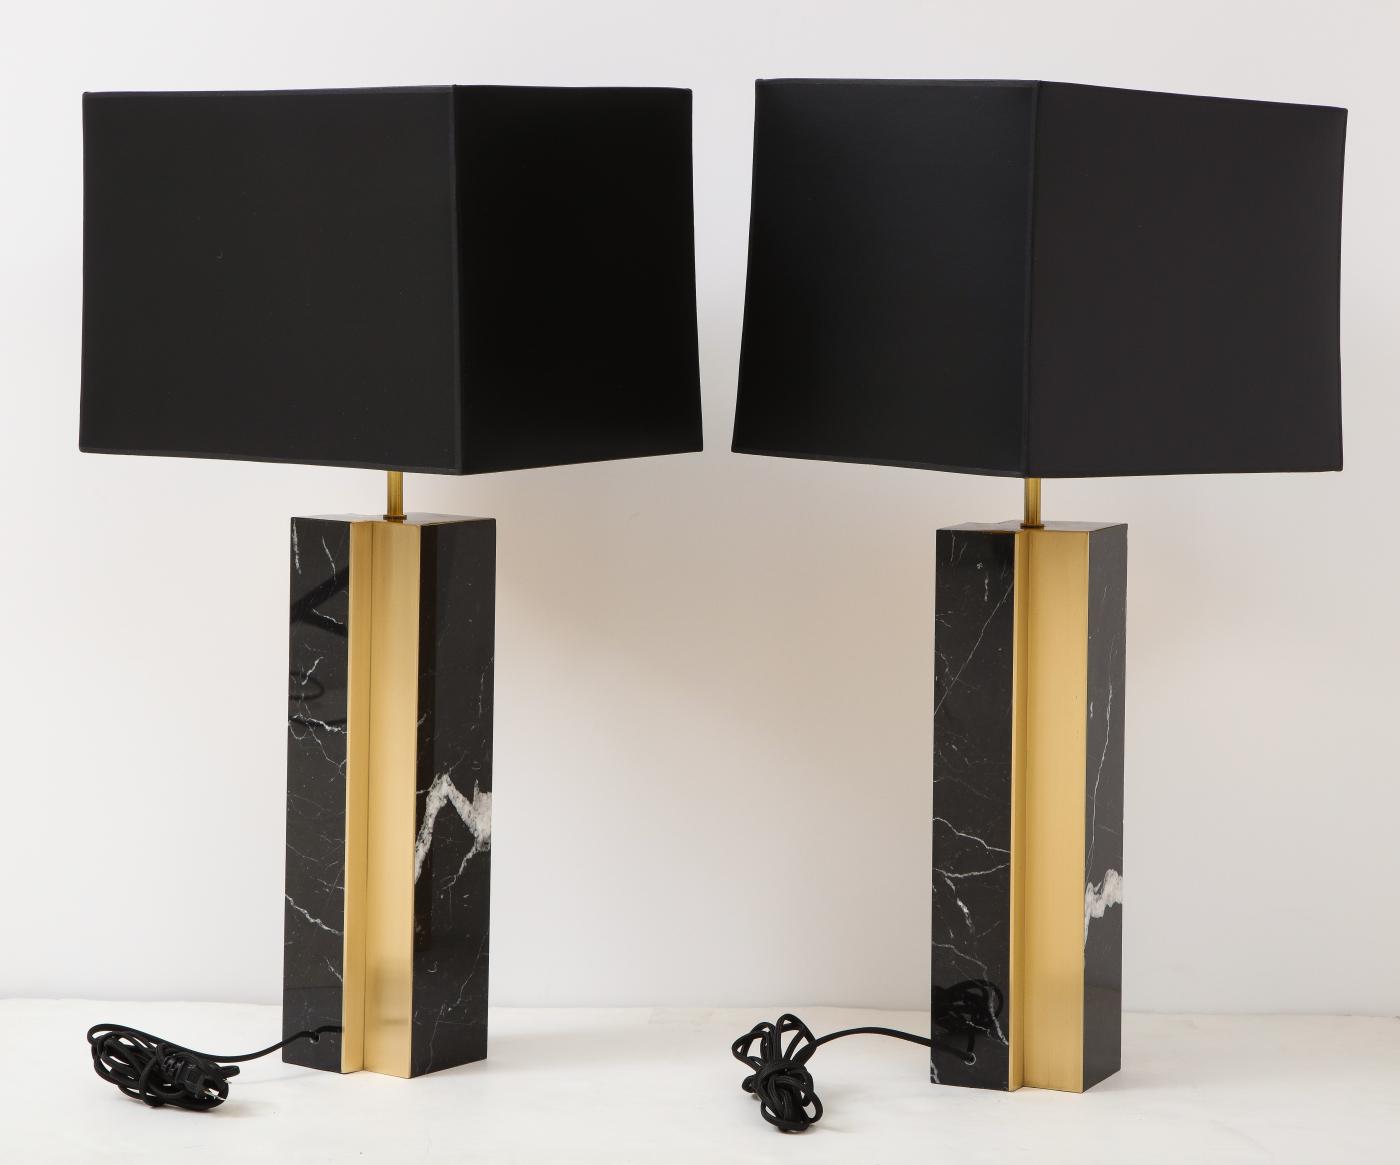 Pair of table lamp with bronze accents. Black and white dalamata quartzite.